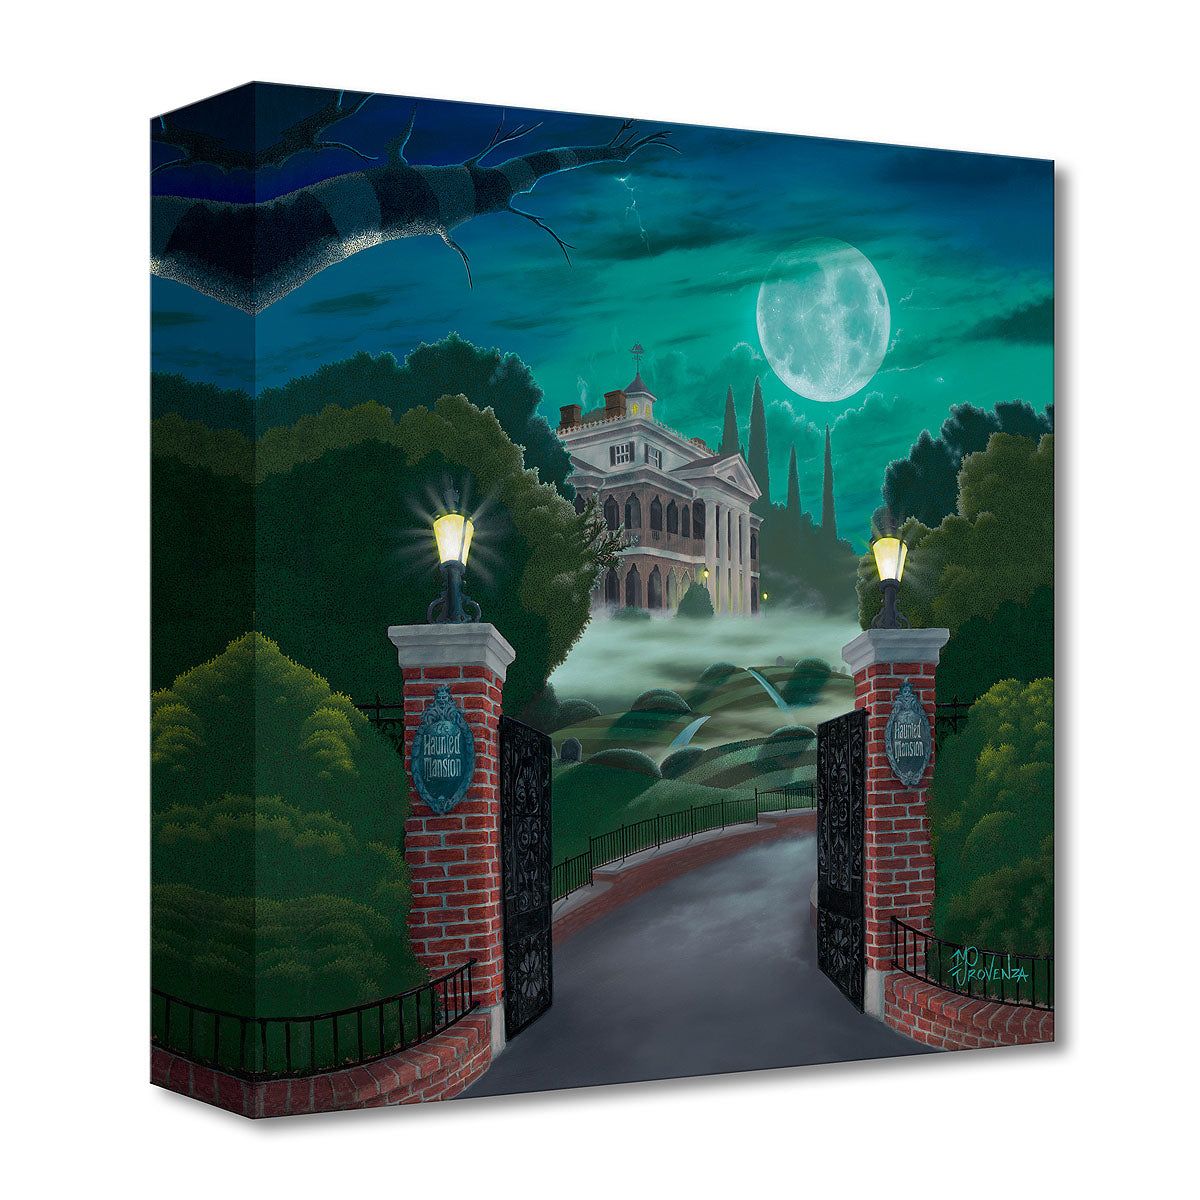 Disneyworld Haunted Mansion Walt Disney Fine Art Michael Provenza Limited Edition 1500 Treasures on Canvas Print TOC "Welcome to the Haunted Mansion"